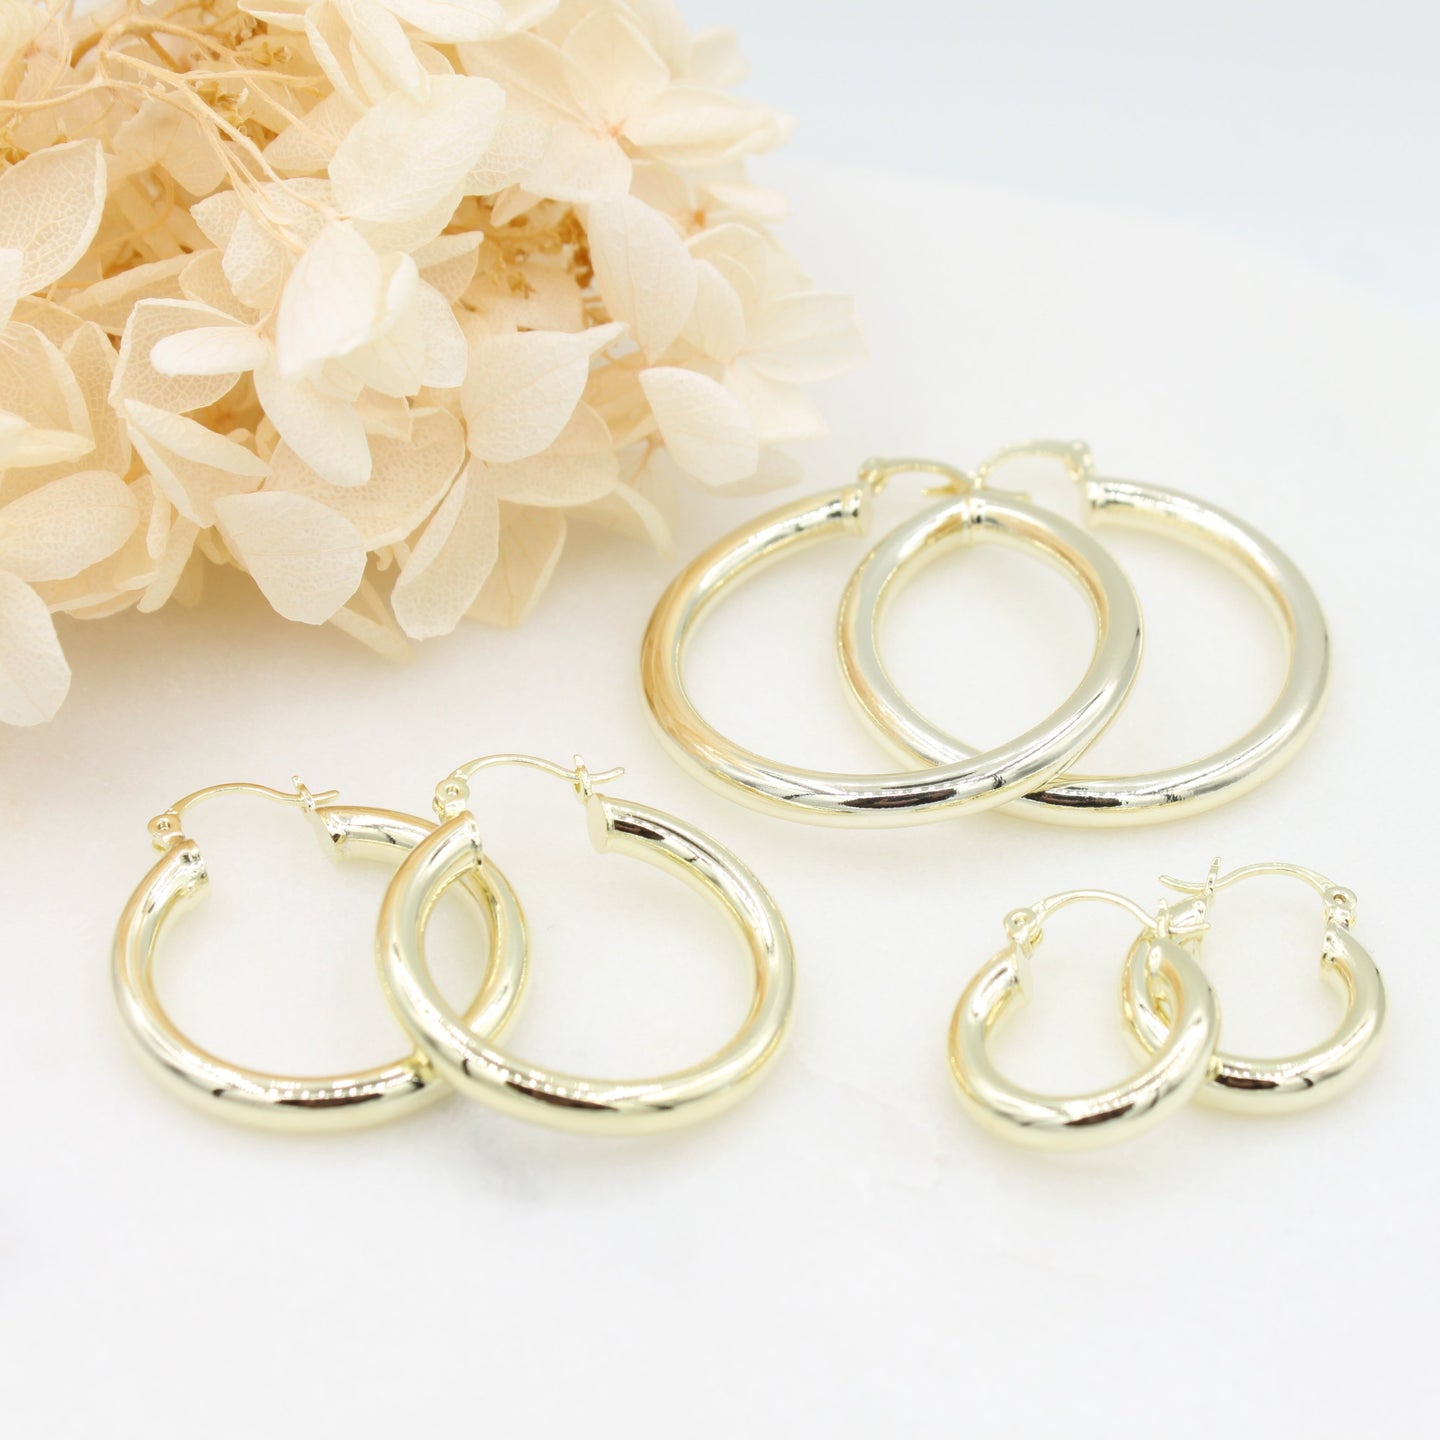 Stevie 14K Gold Filled Hoops- 3 Sizes Available - Elisa Maree Jewelry